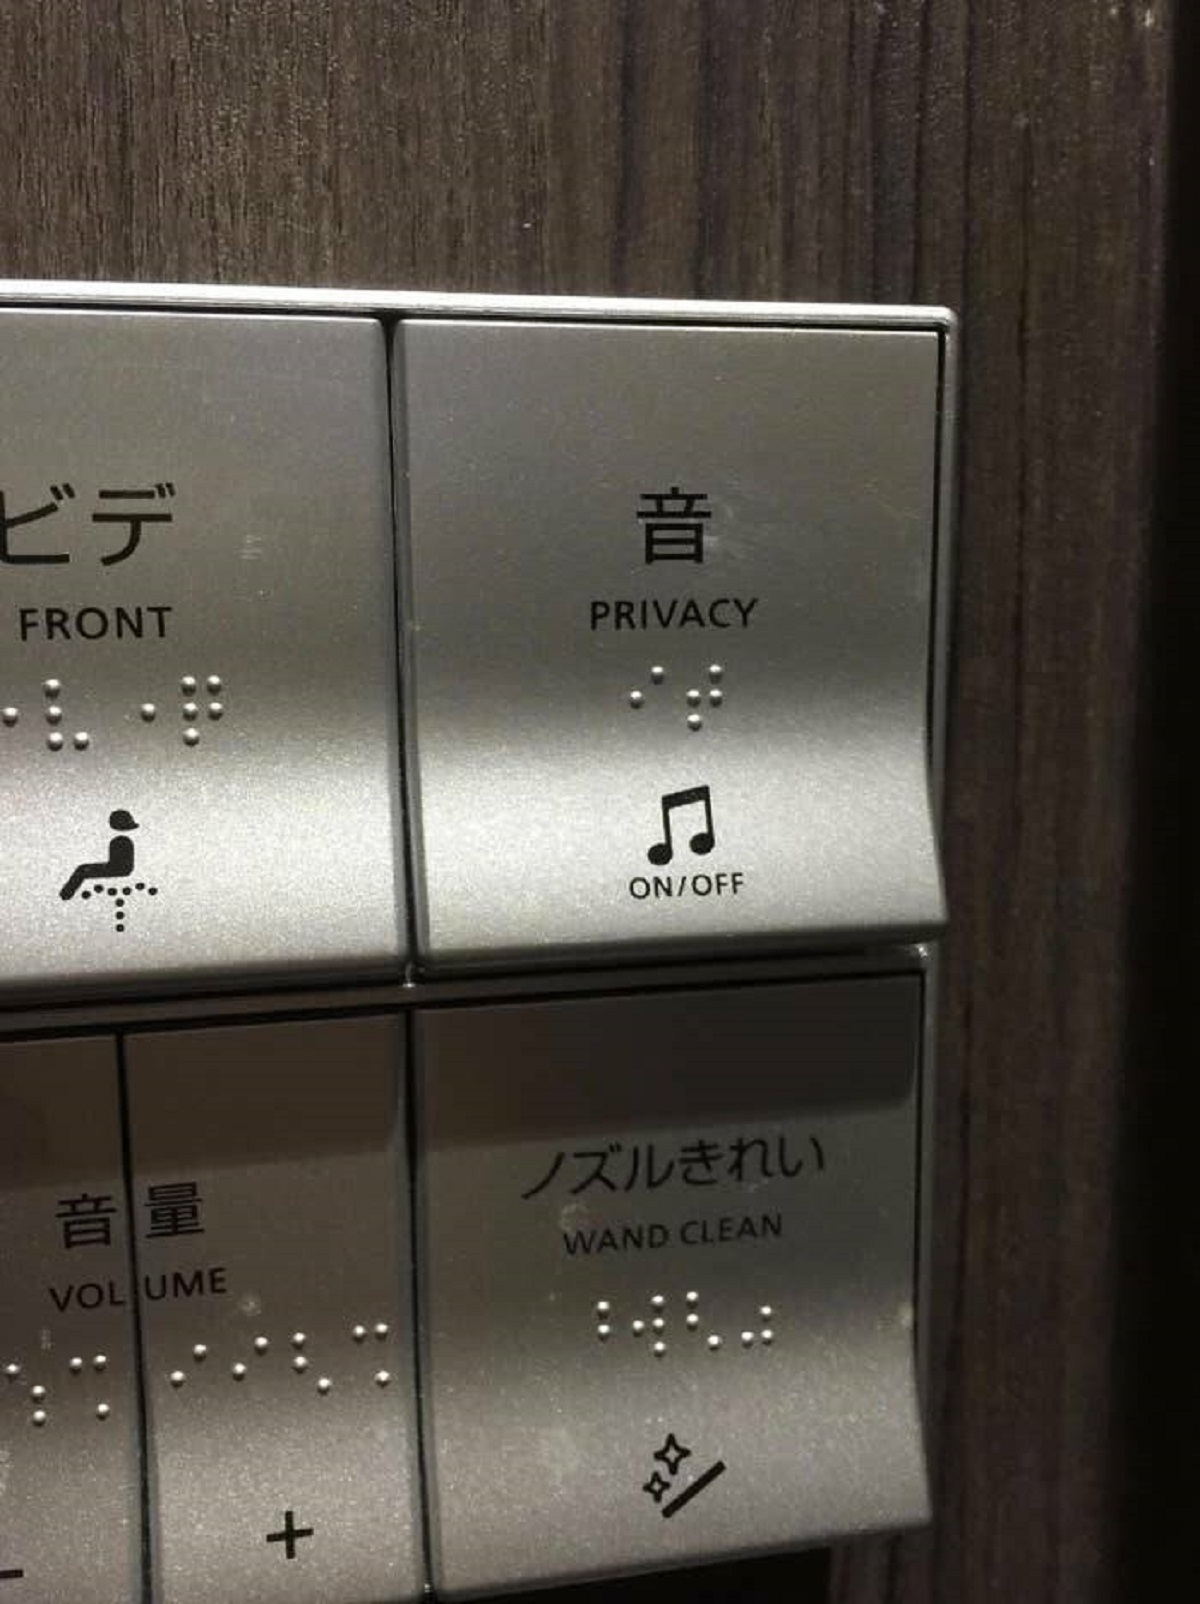 The absolute worst part about pooping in public bathrooms is that everyone can hear you. But not in Japan, where you can mask the sound with music!